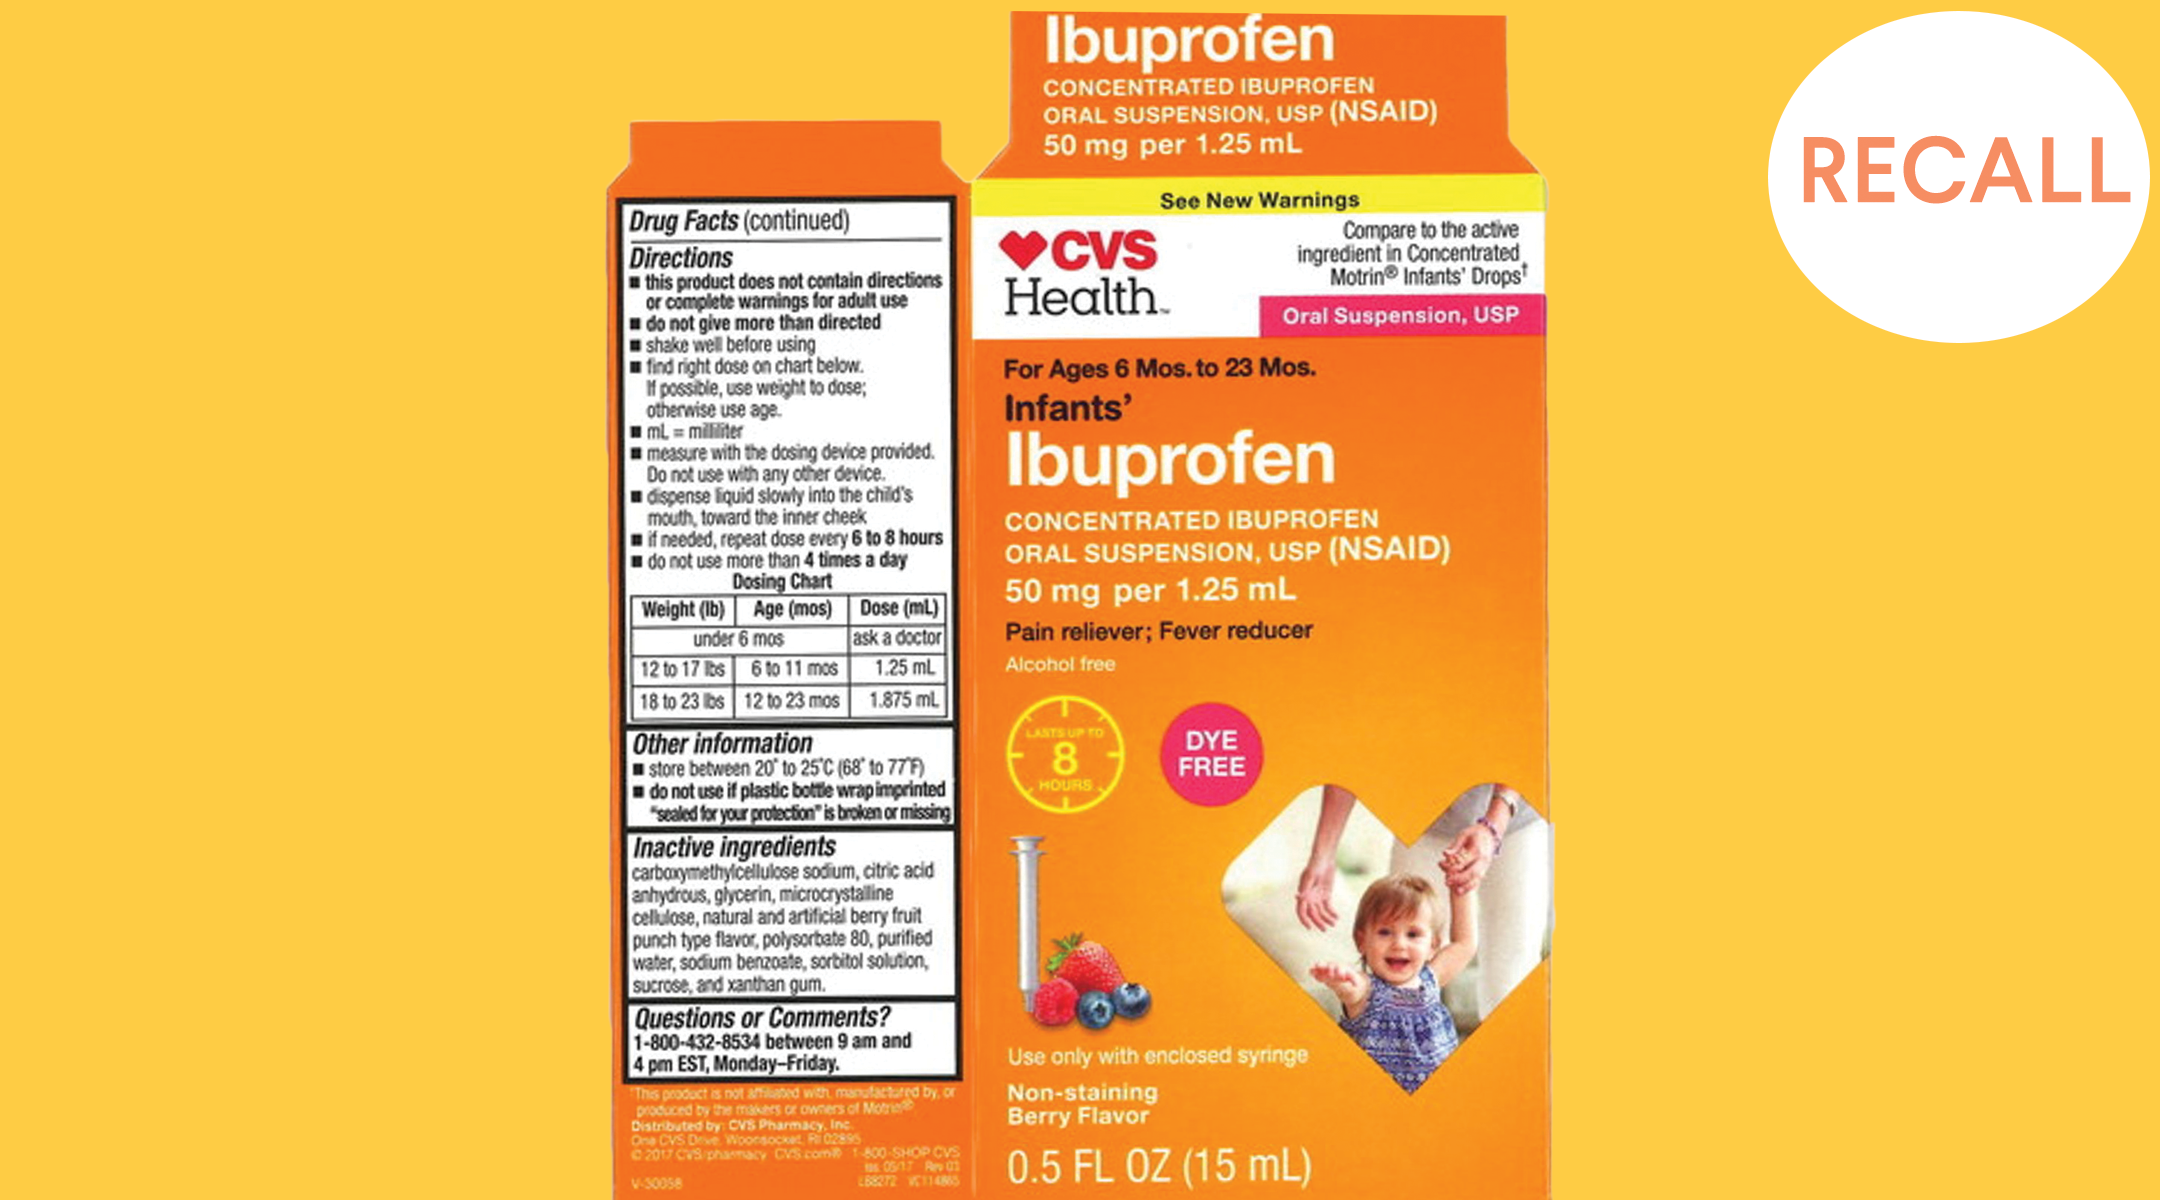 infant ibuprofen from walmart, cvs and family dollar recalled